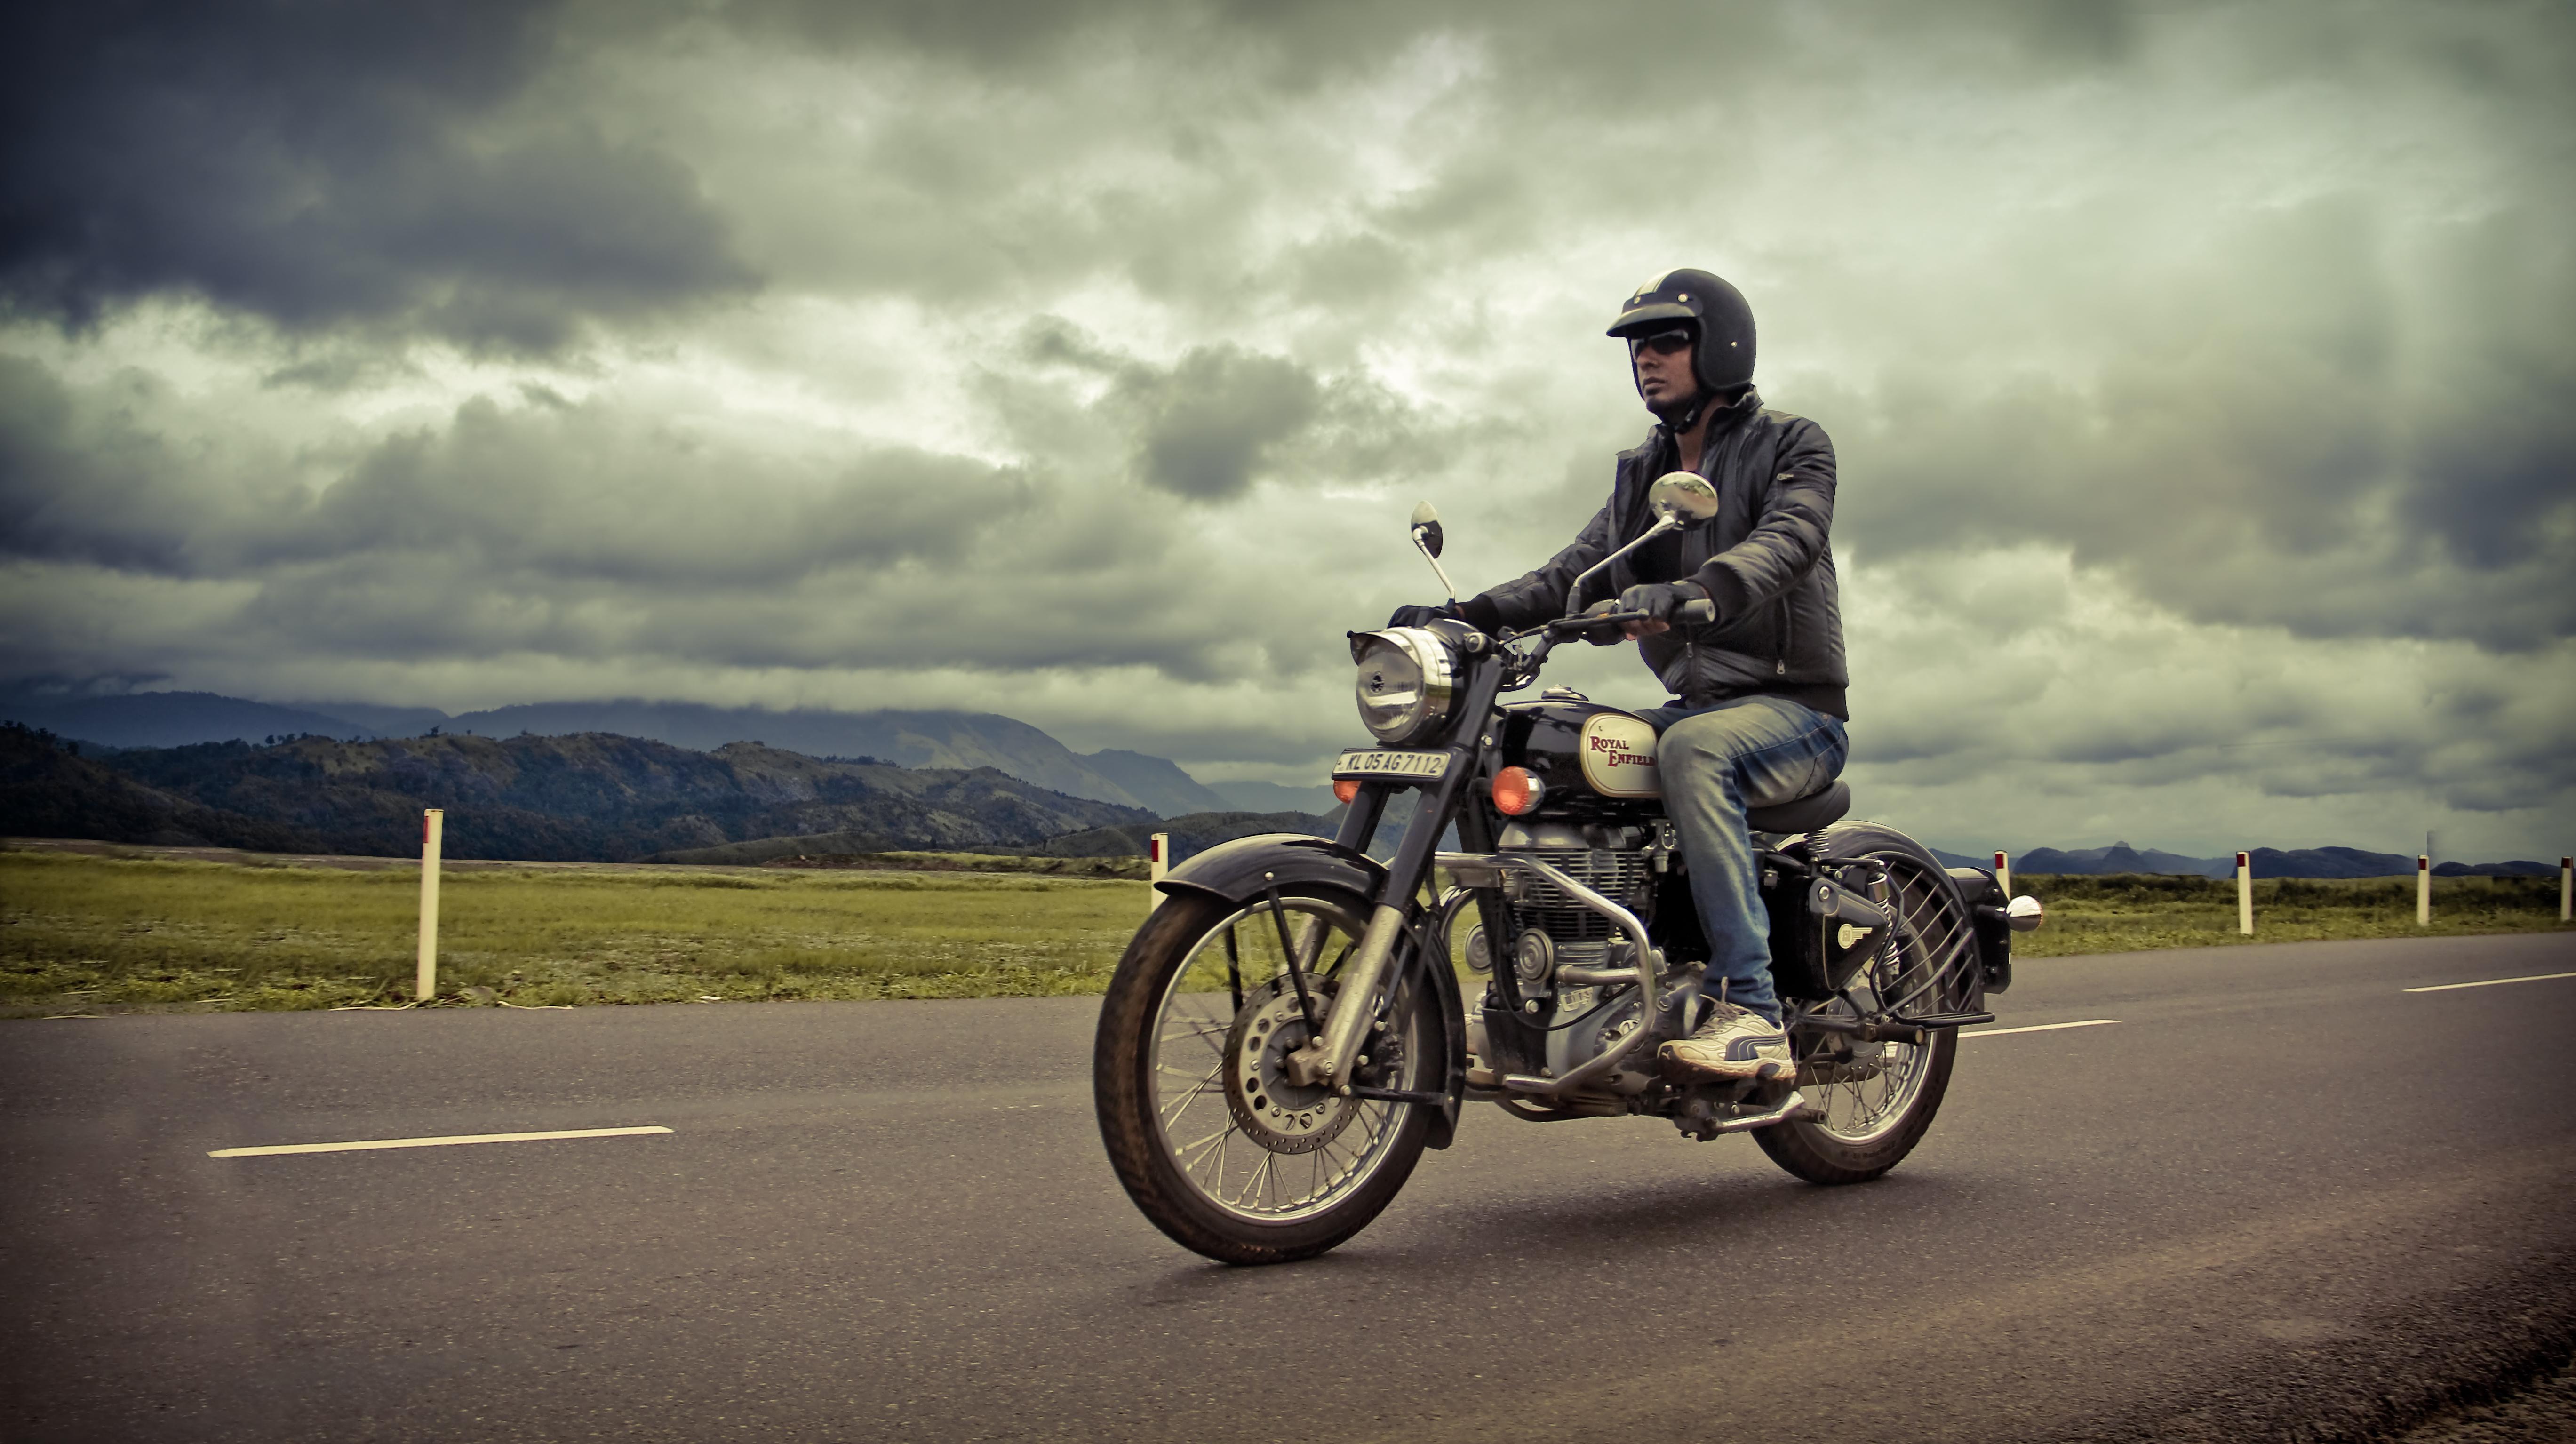 10 Safety Tips for New Motorcycle Riders in San Diego